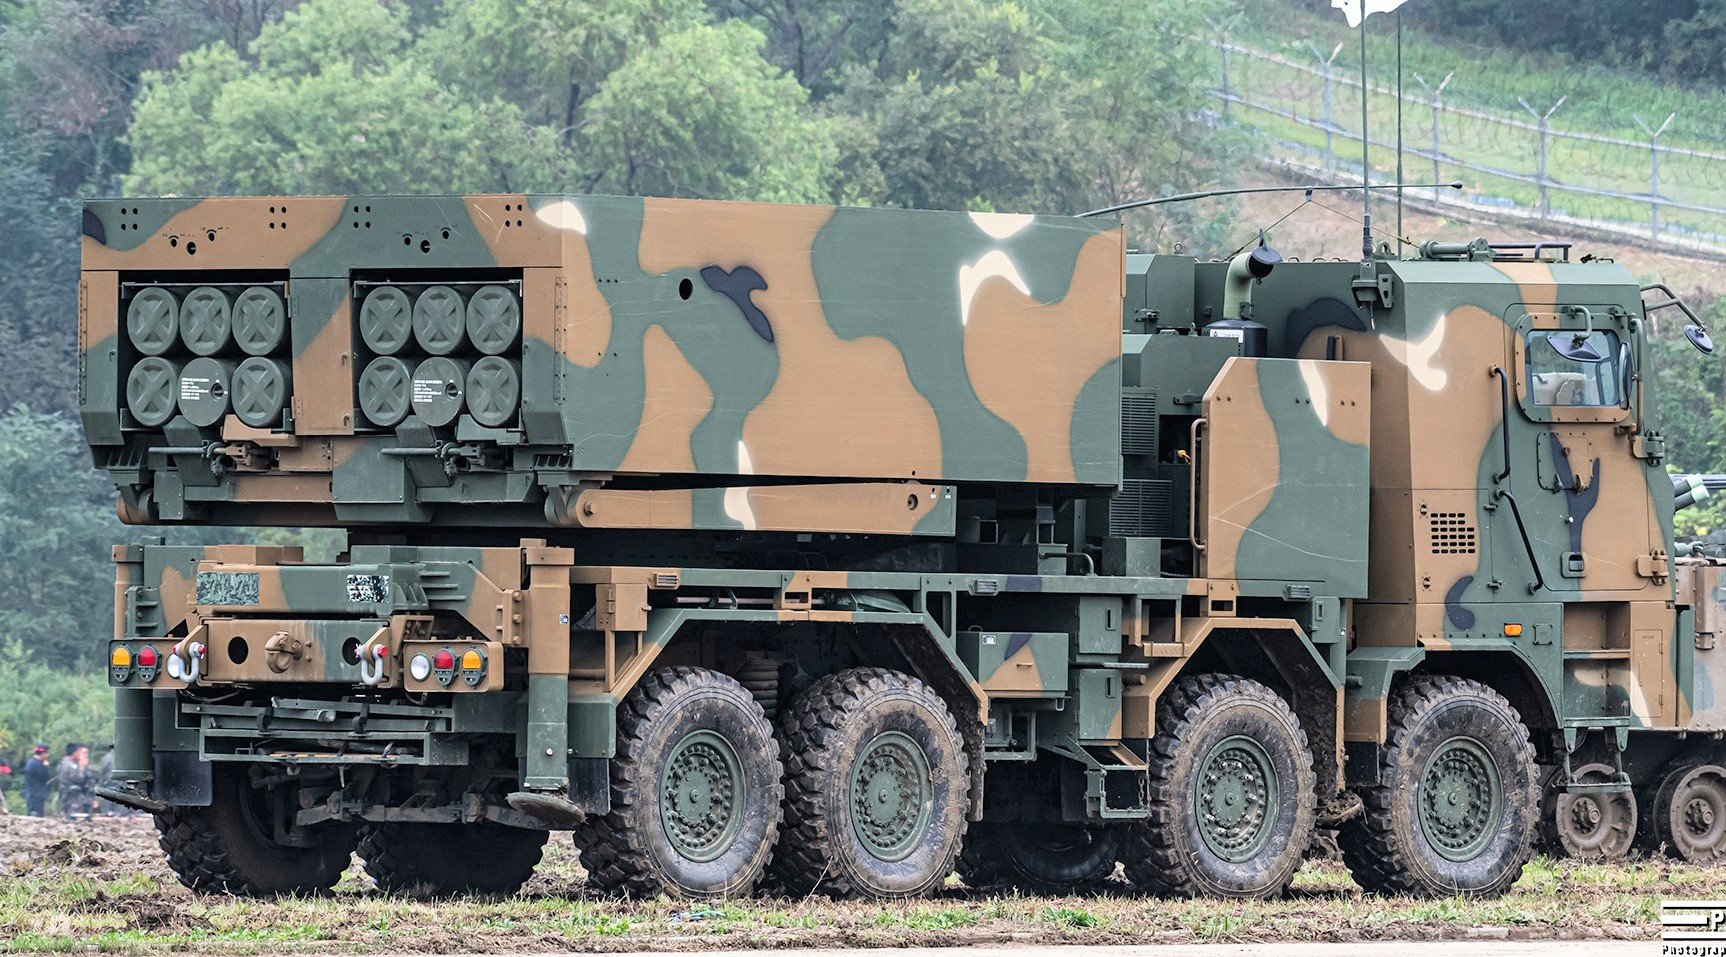 Junsupreme on Twitter: "Deputy Prime Minister @mblaszczak 🇵🇱 informed that negotiations on purchase of the Korean K239 Chunmoo missile artillery system have been completed. Almost 300 launchers will be delivered to the